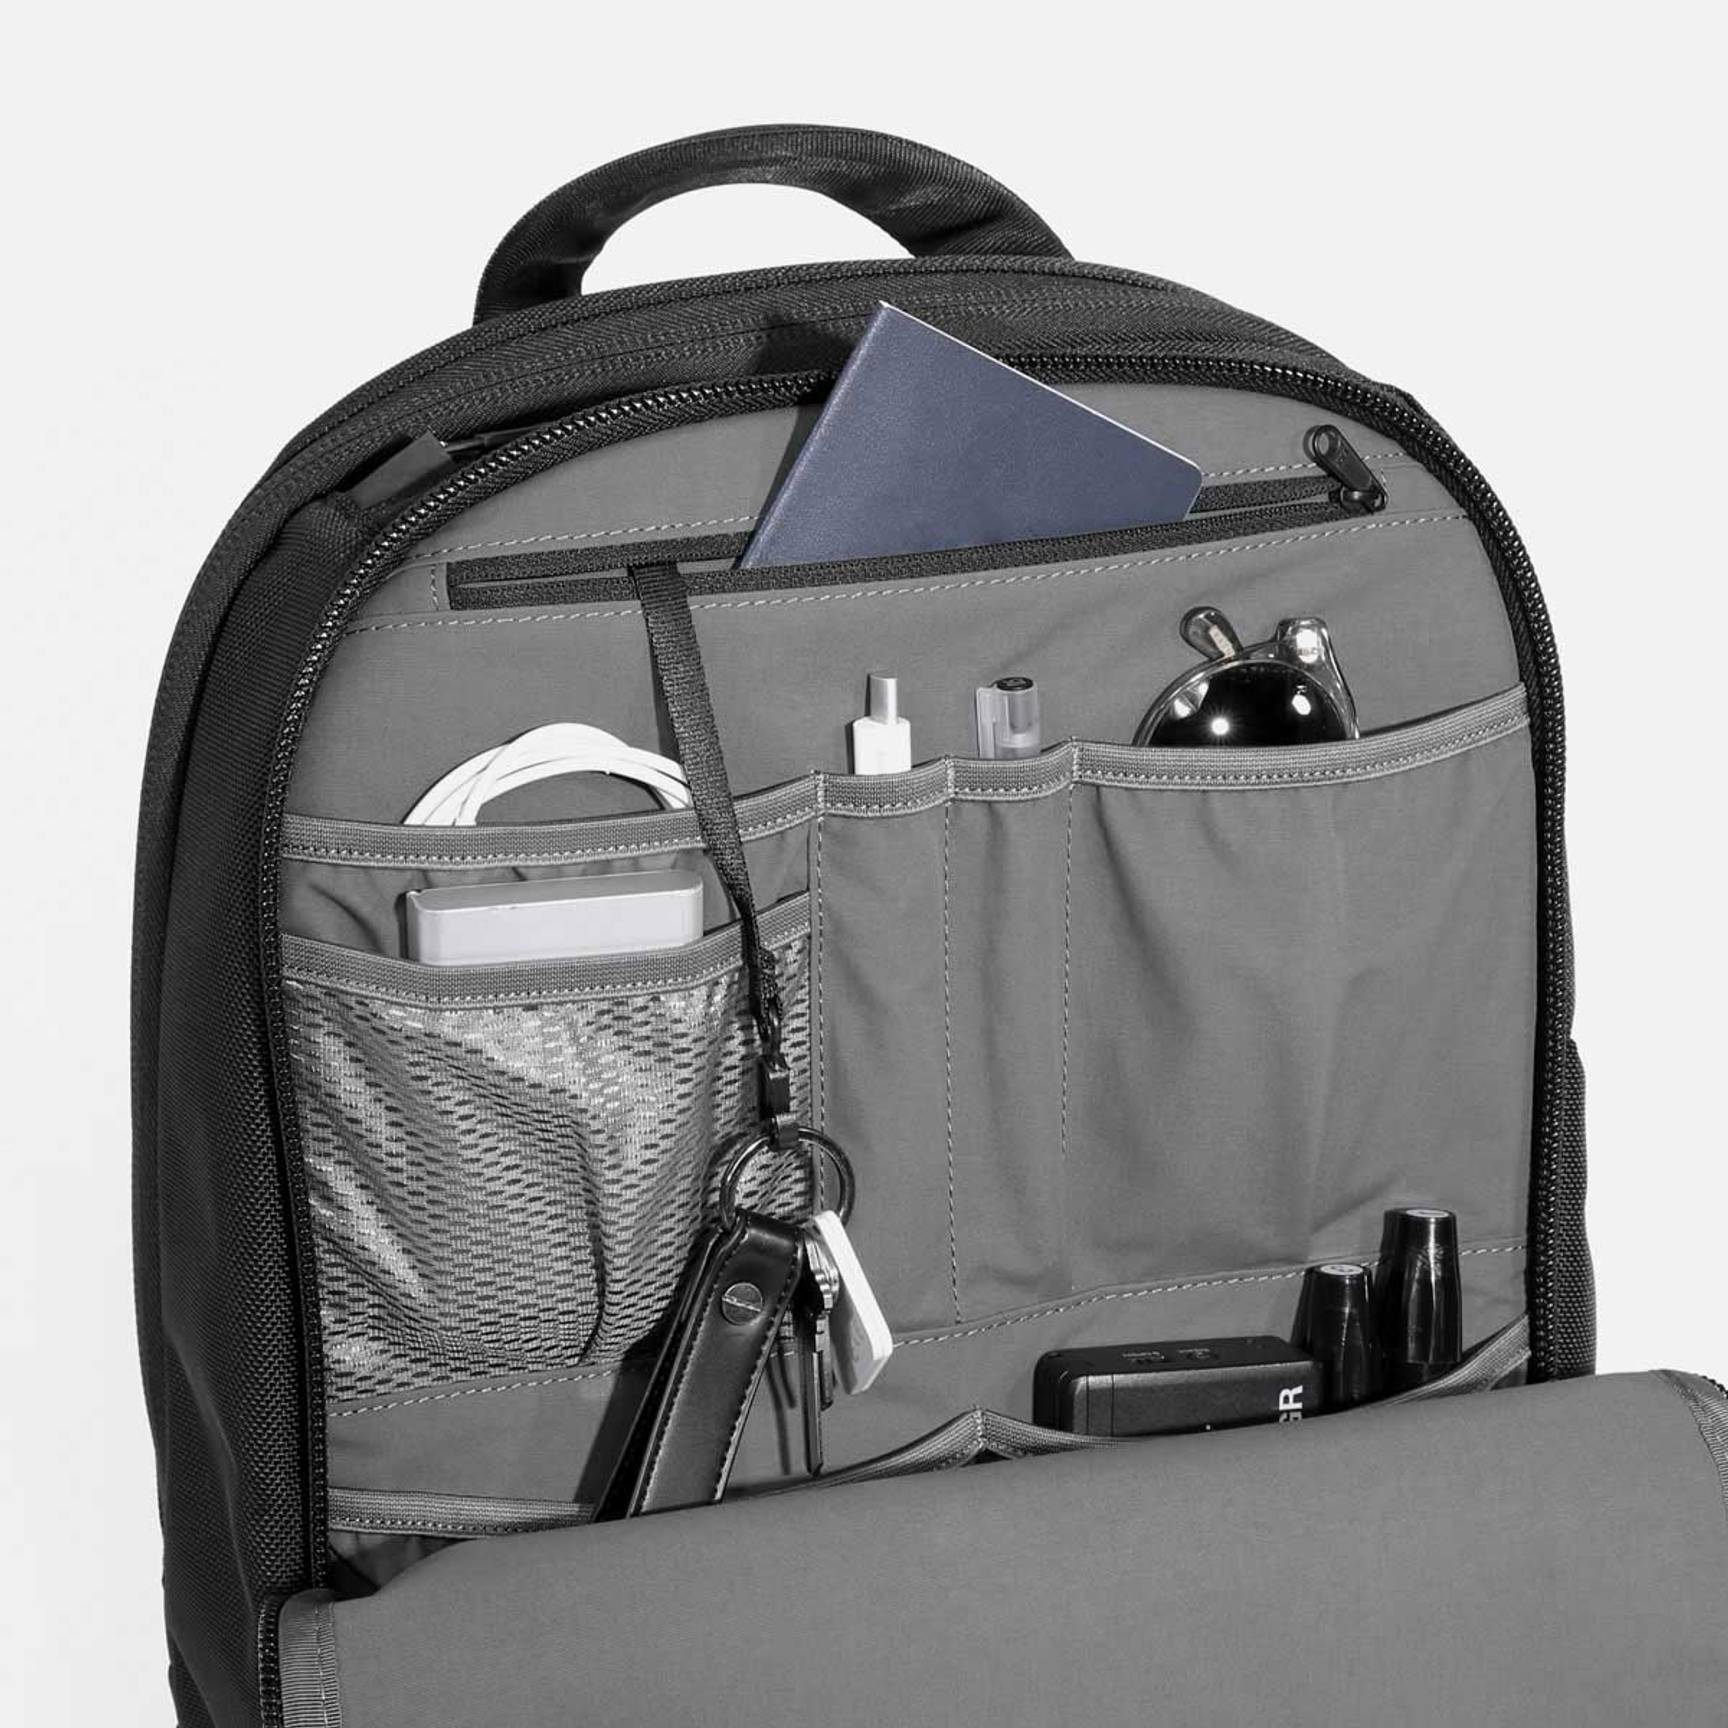 Acer 15 inch Laptop Backpack Black - Price in India